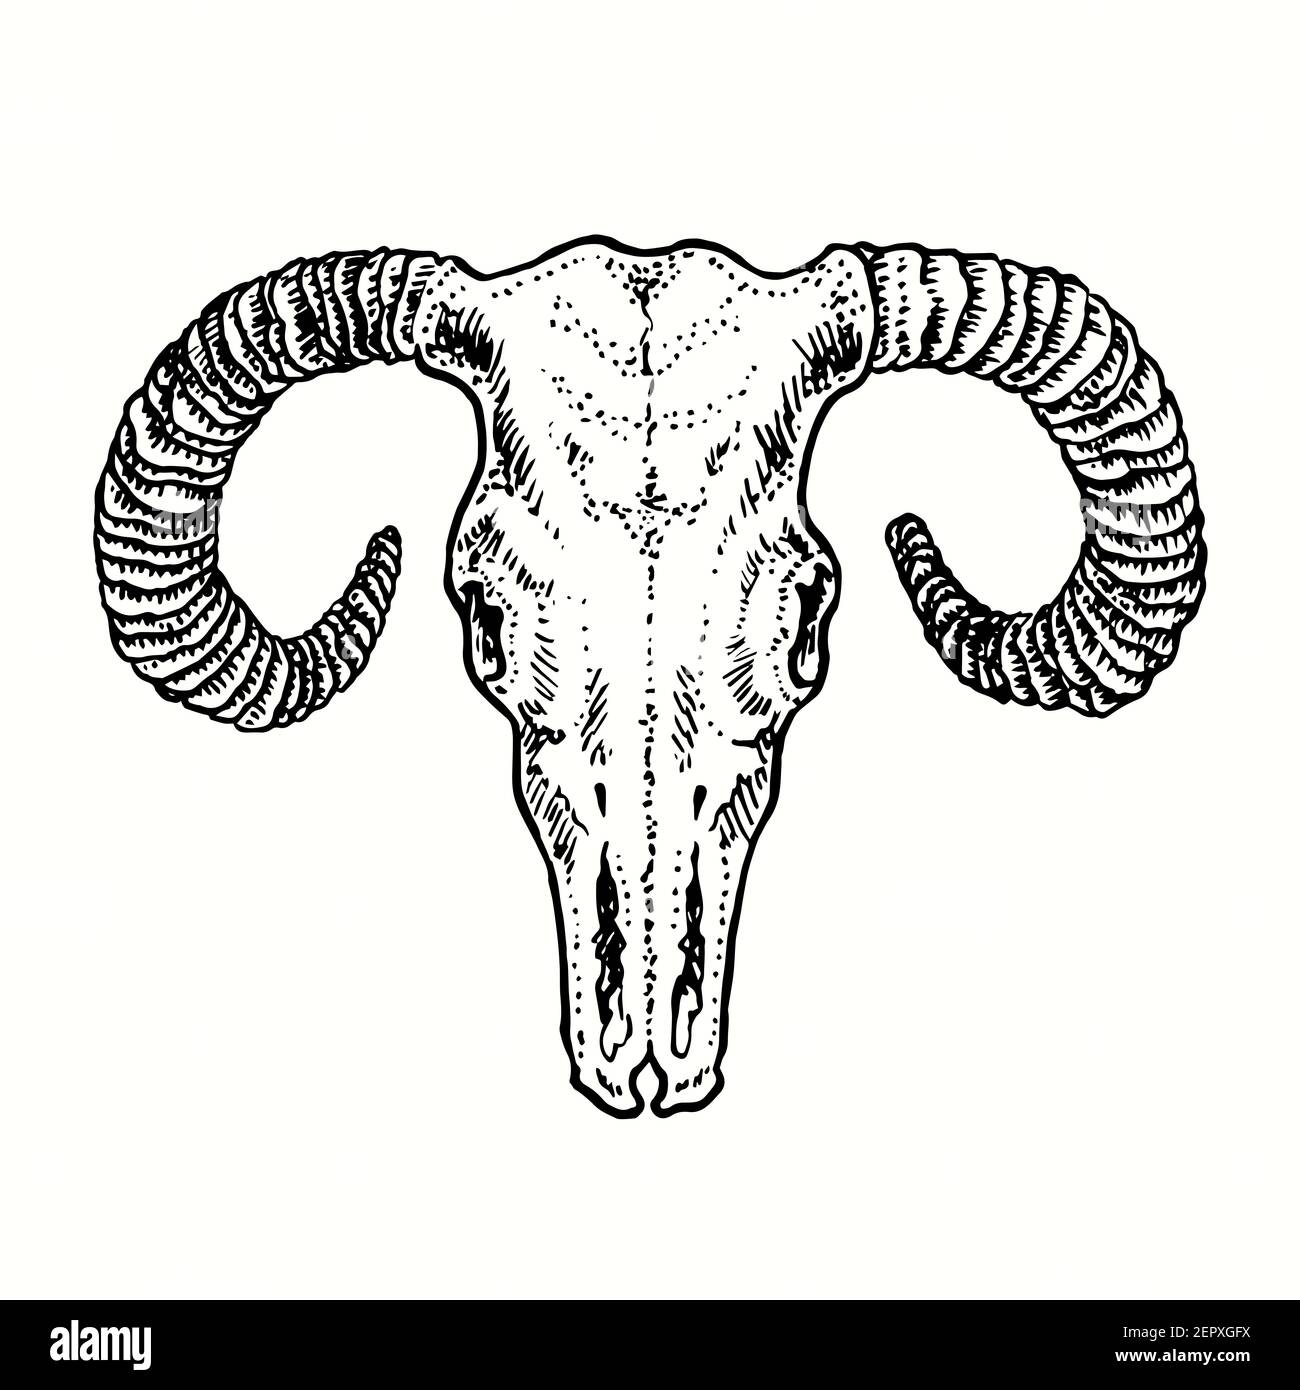 Ram skull, front view. Ink black and white drawing. Vector illustration Stock Photo